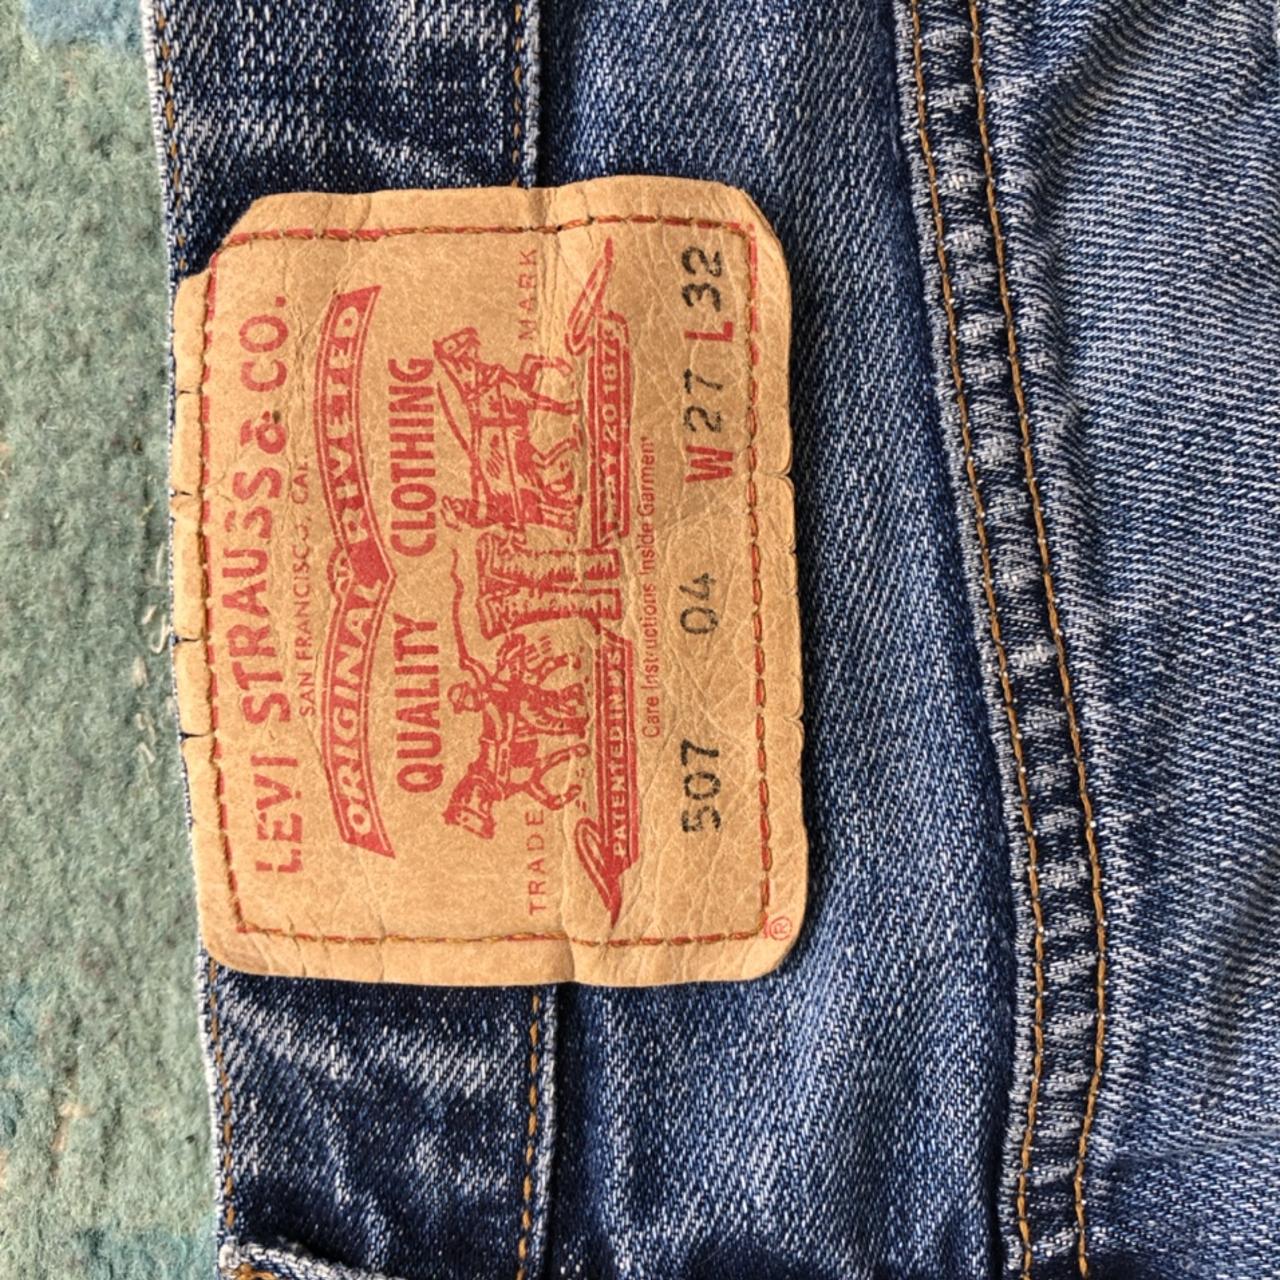 Amazing levi 507 jeans w27 L32. Fraying at cuffs of... Depop